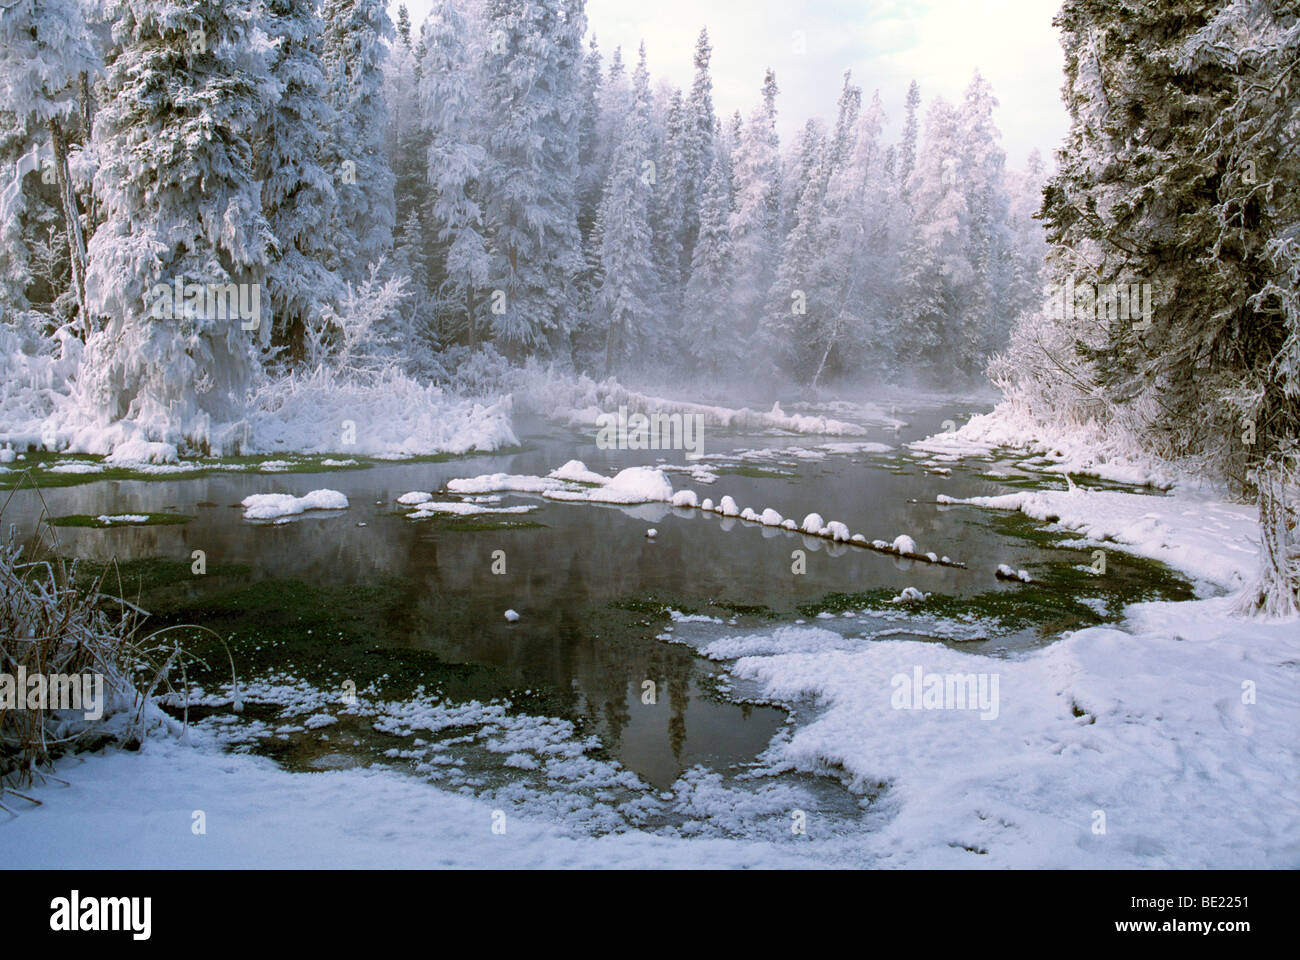 Liard River Hot Springs Provincial Park, Northern BC, British Columbia, Canada - Winter Setting of Frosted Trees in Warm Marsh Stock Photo